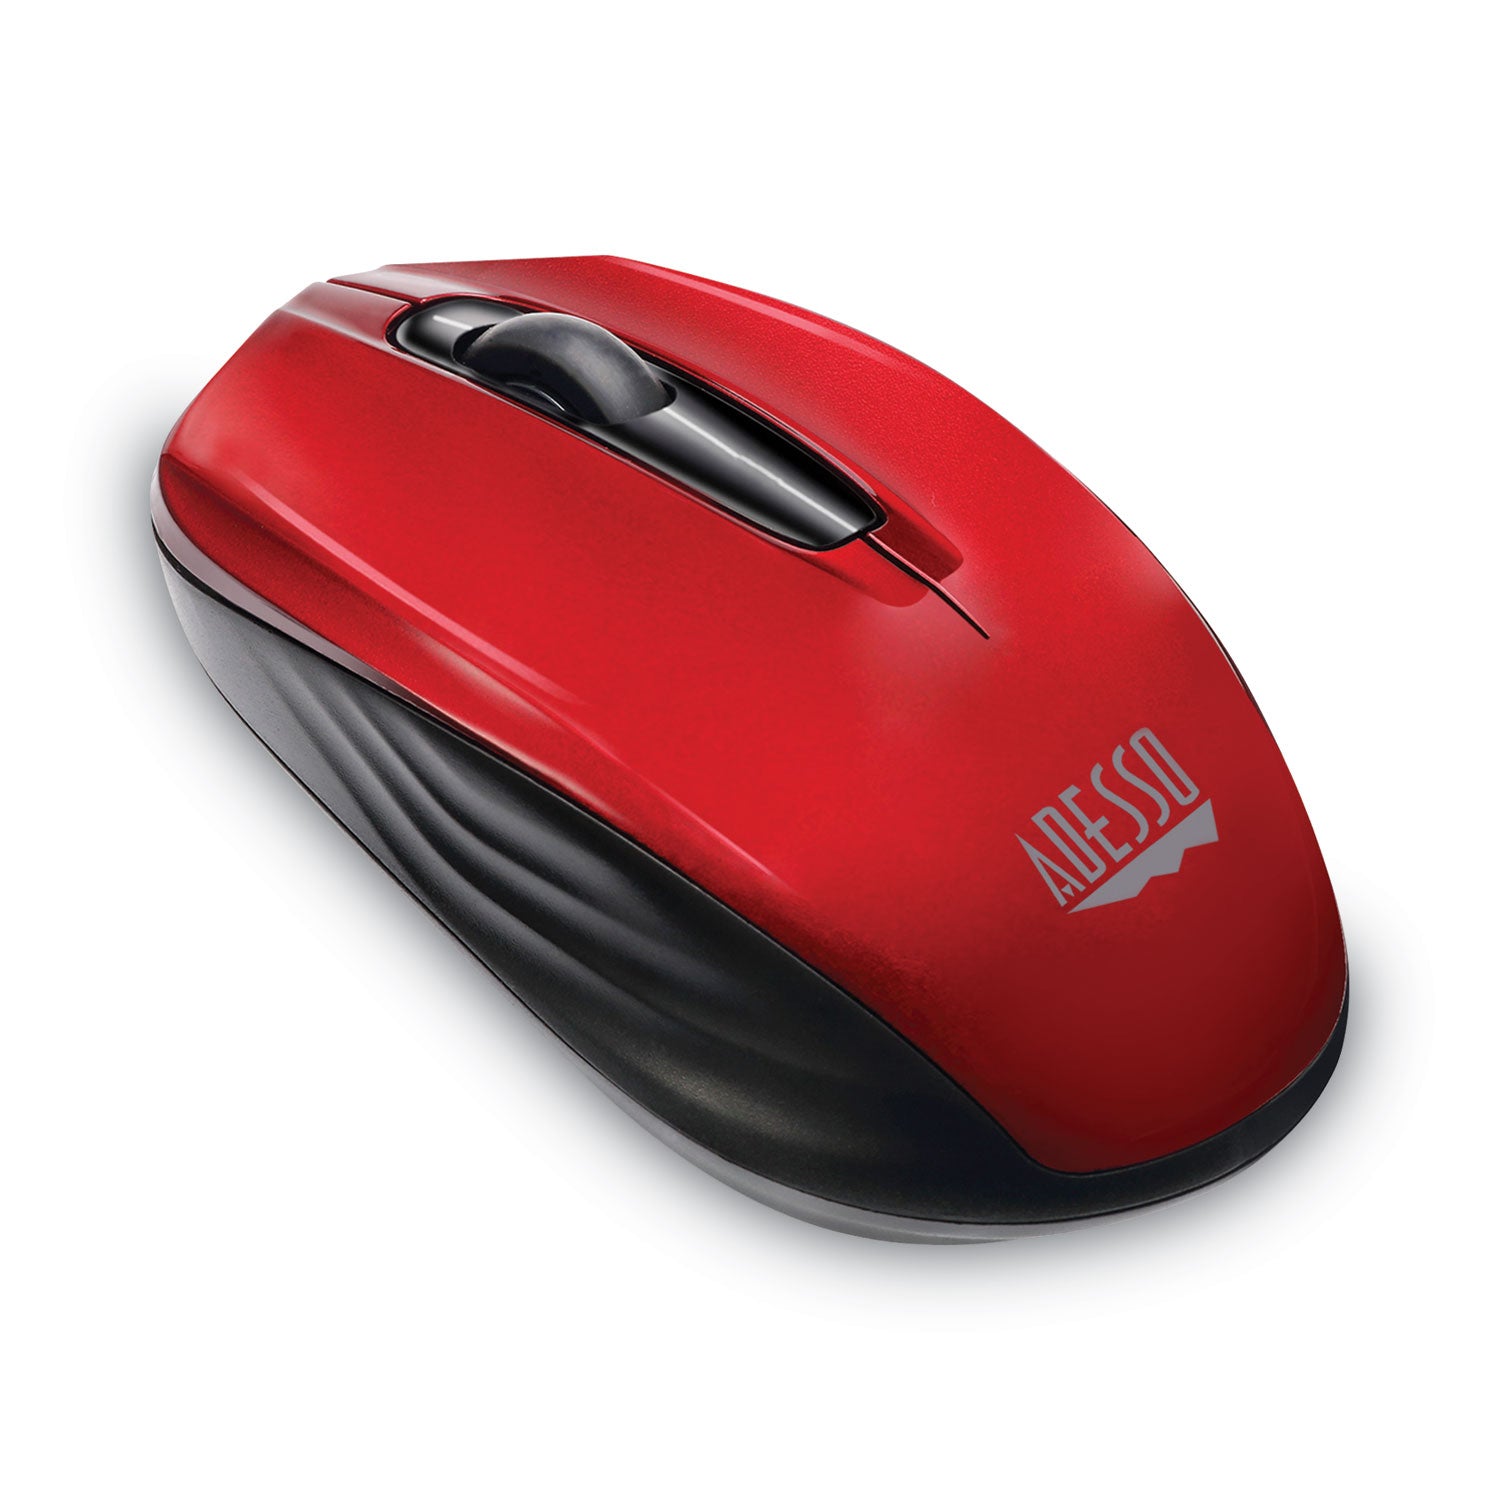 imouse-s50-wireless-mini-mouse-24-ghz-frequency-33-ft-wireless-range-left-right-hand-use-red_adeimouses50r - 3